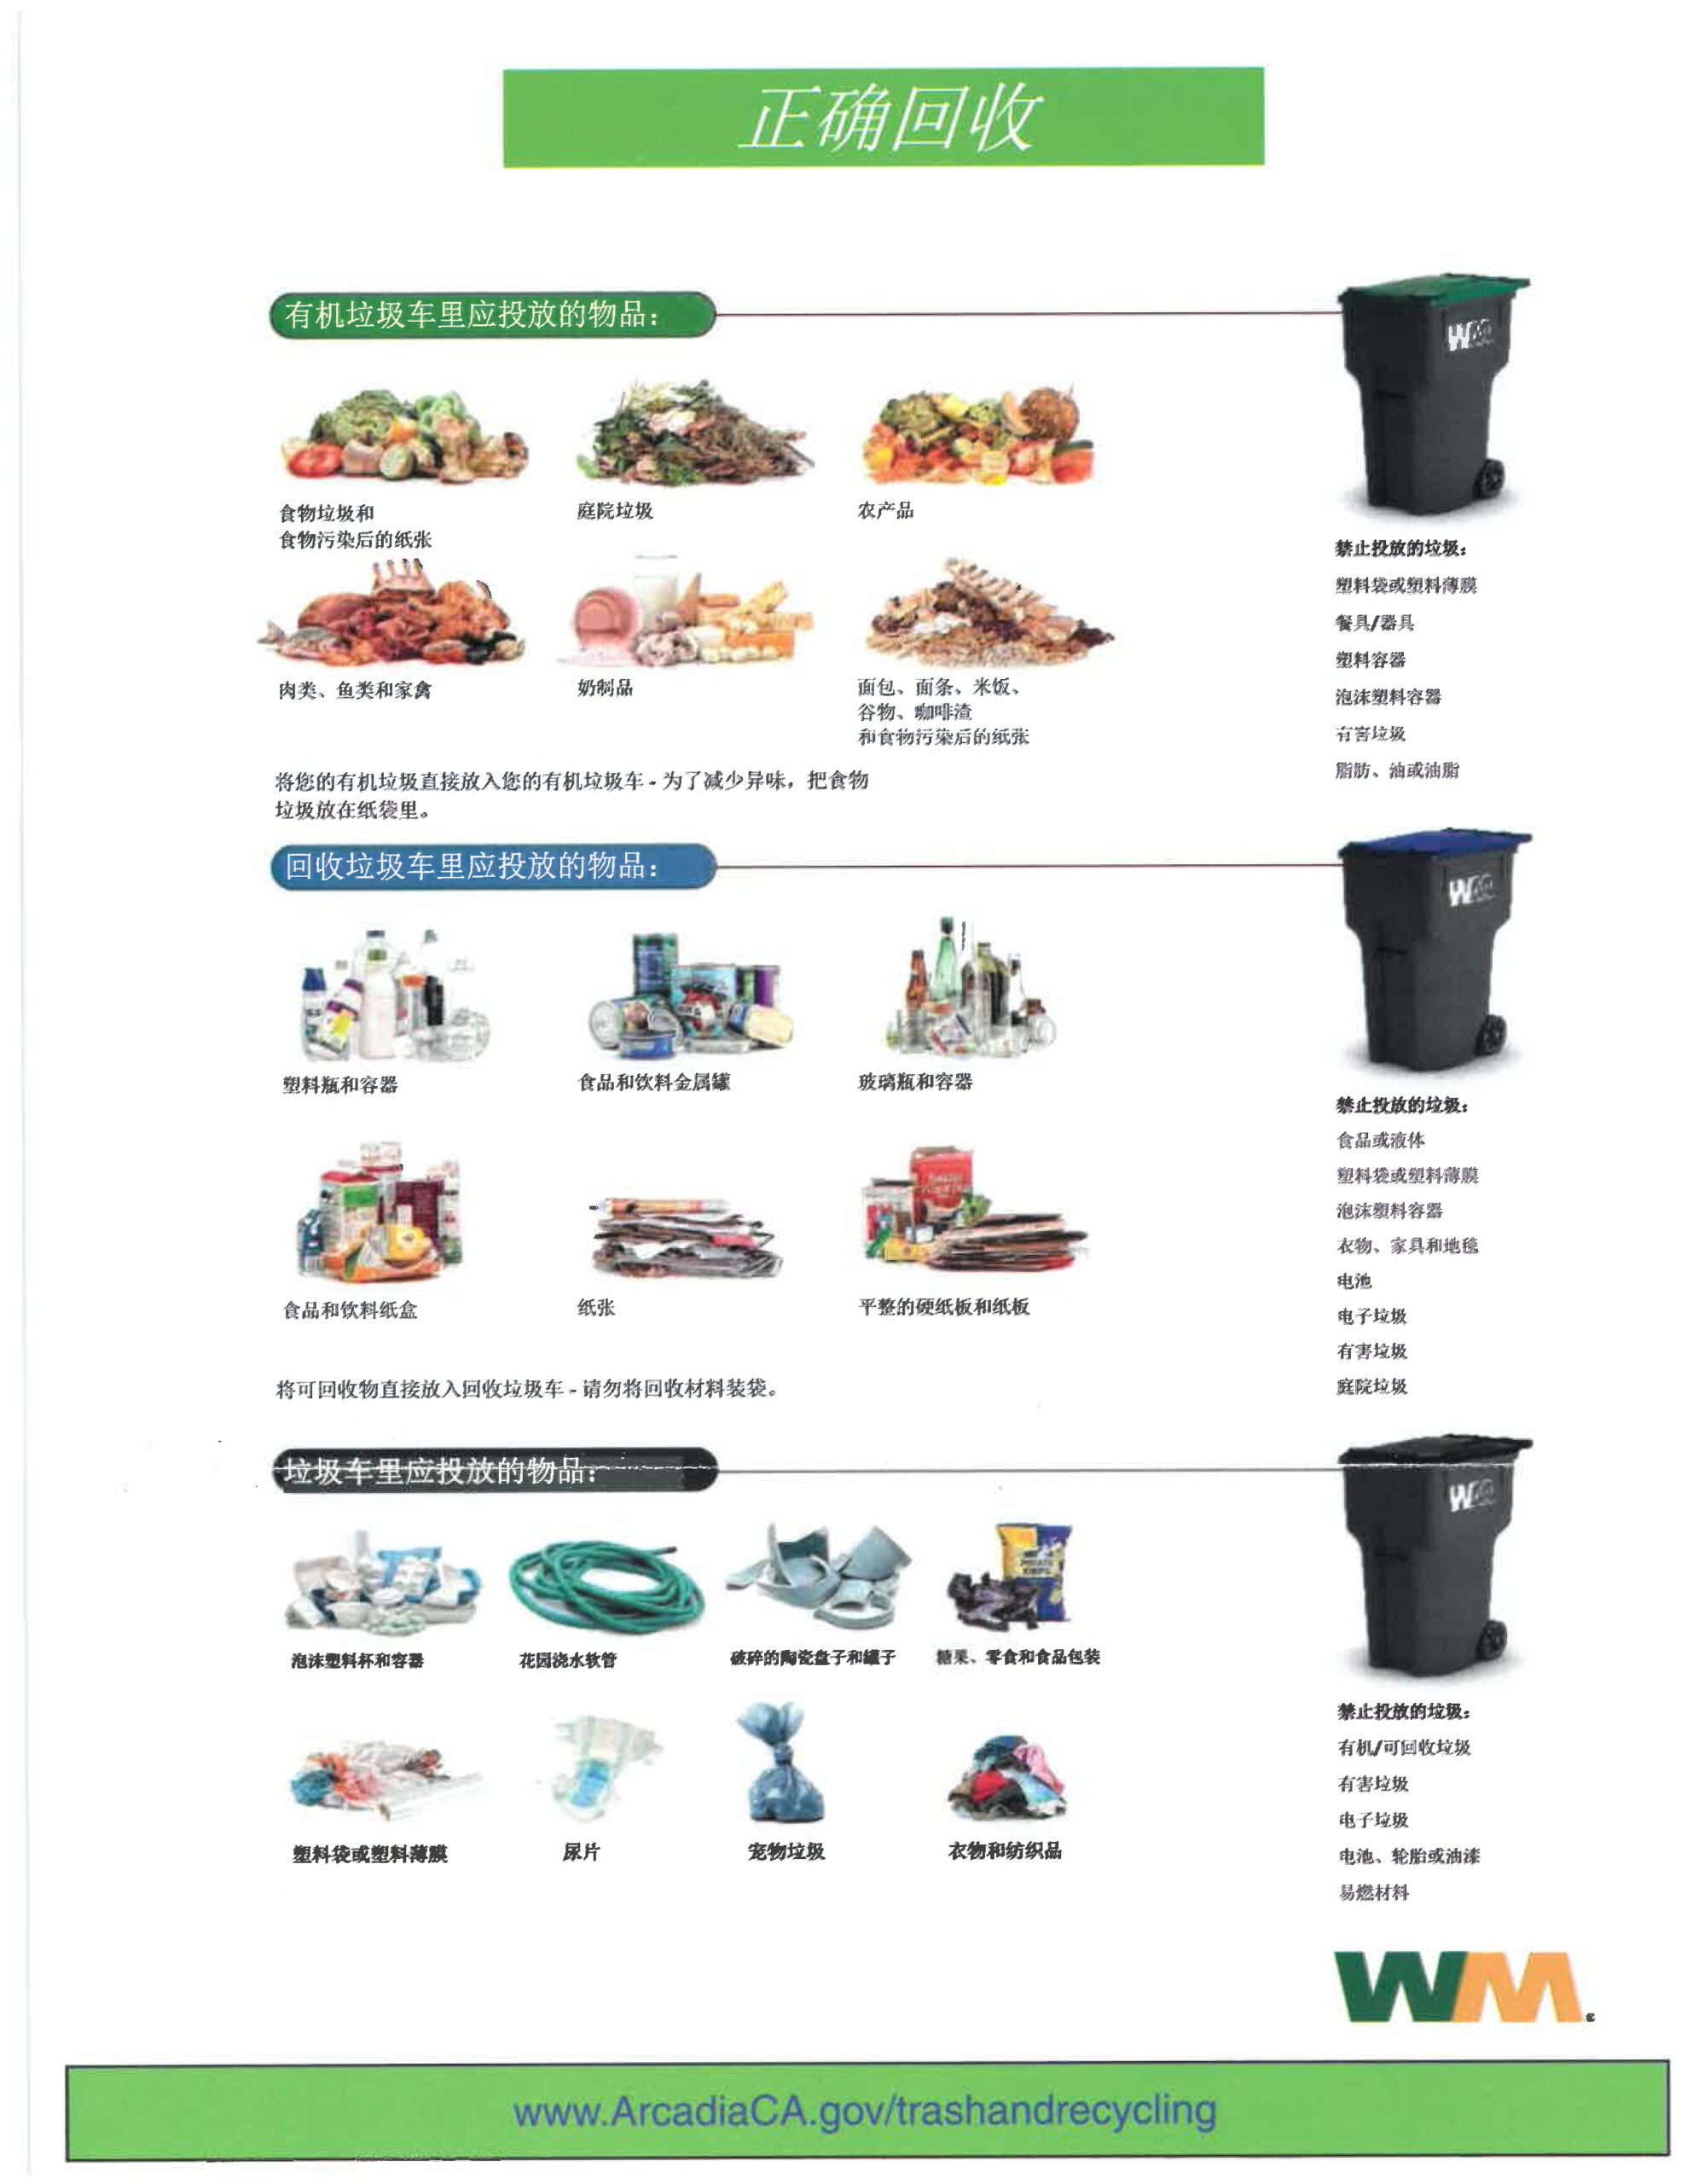 organic waste collection information showing items to recycle in Chinese